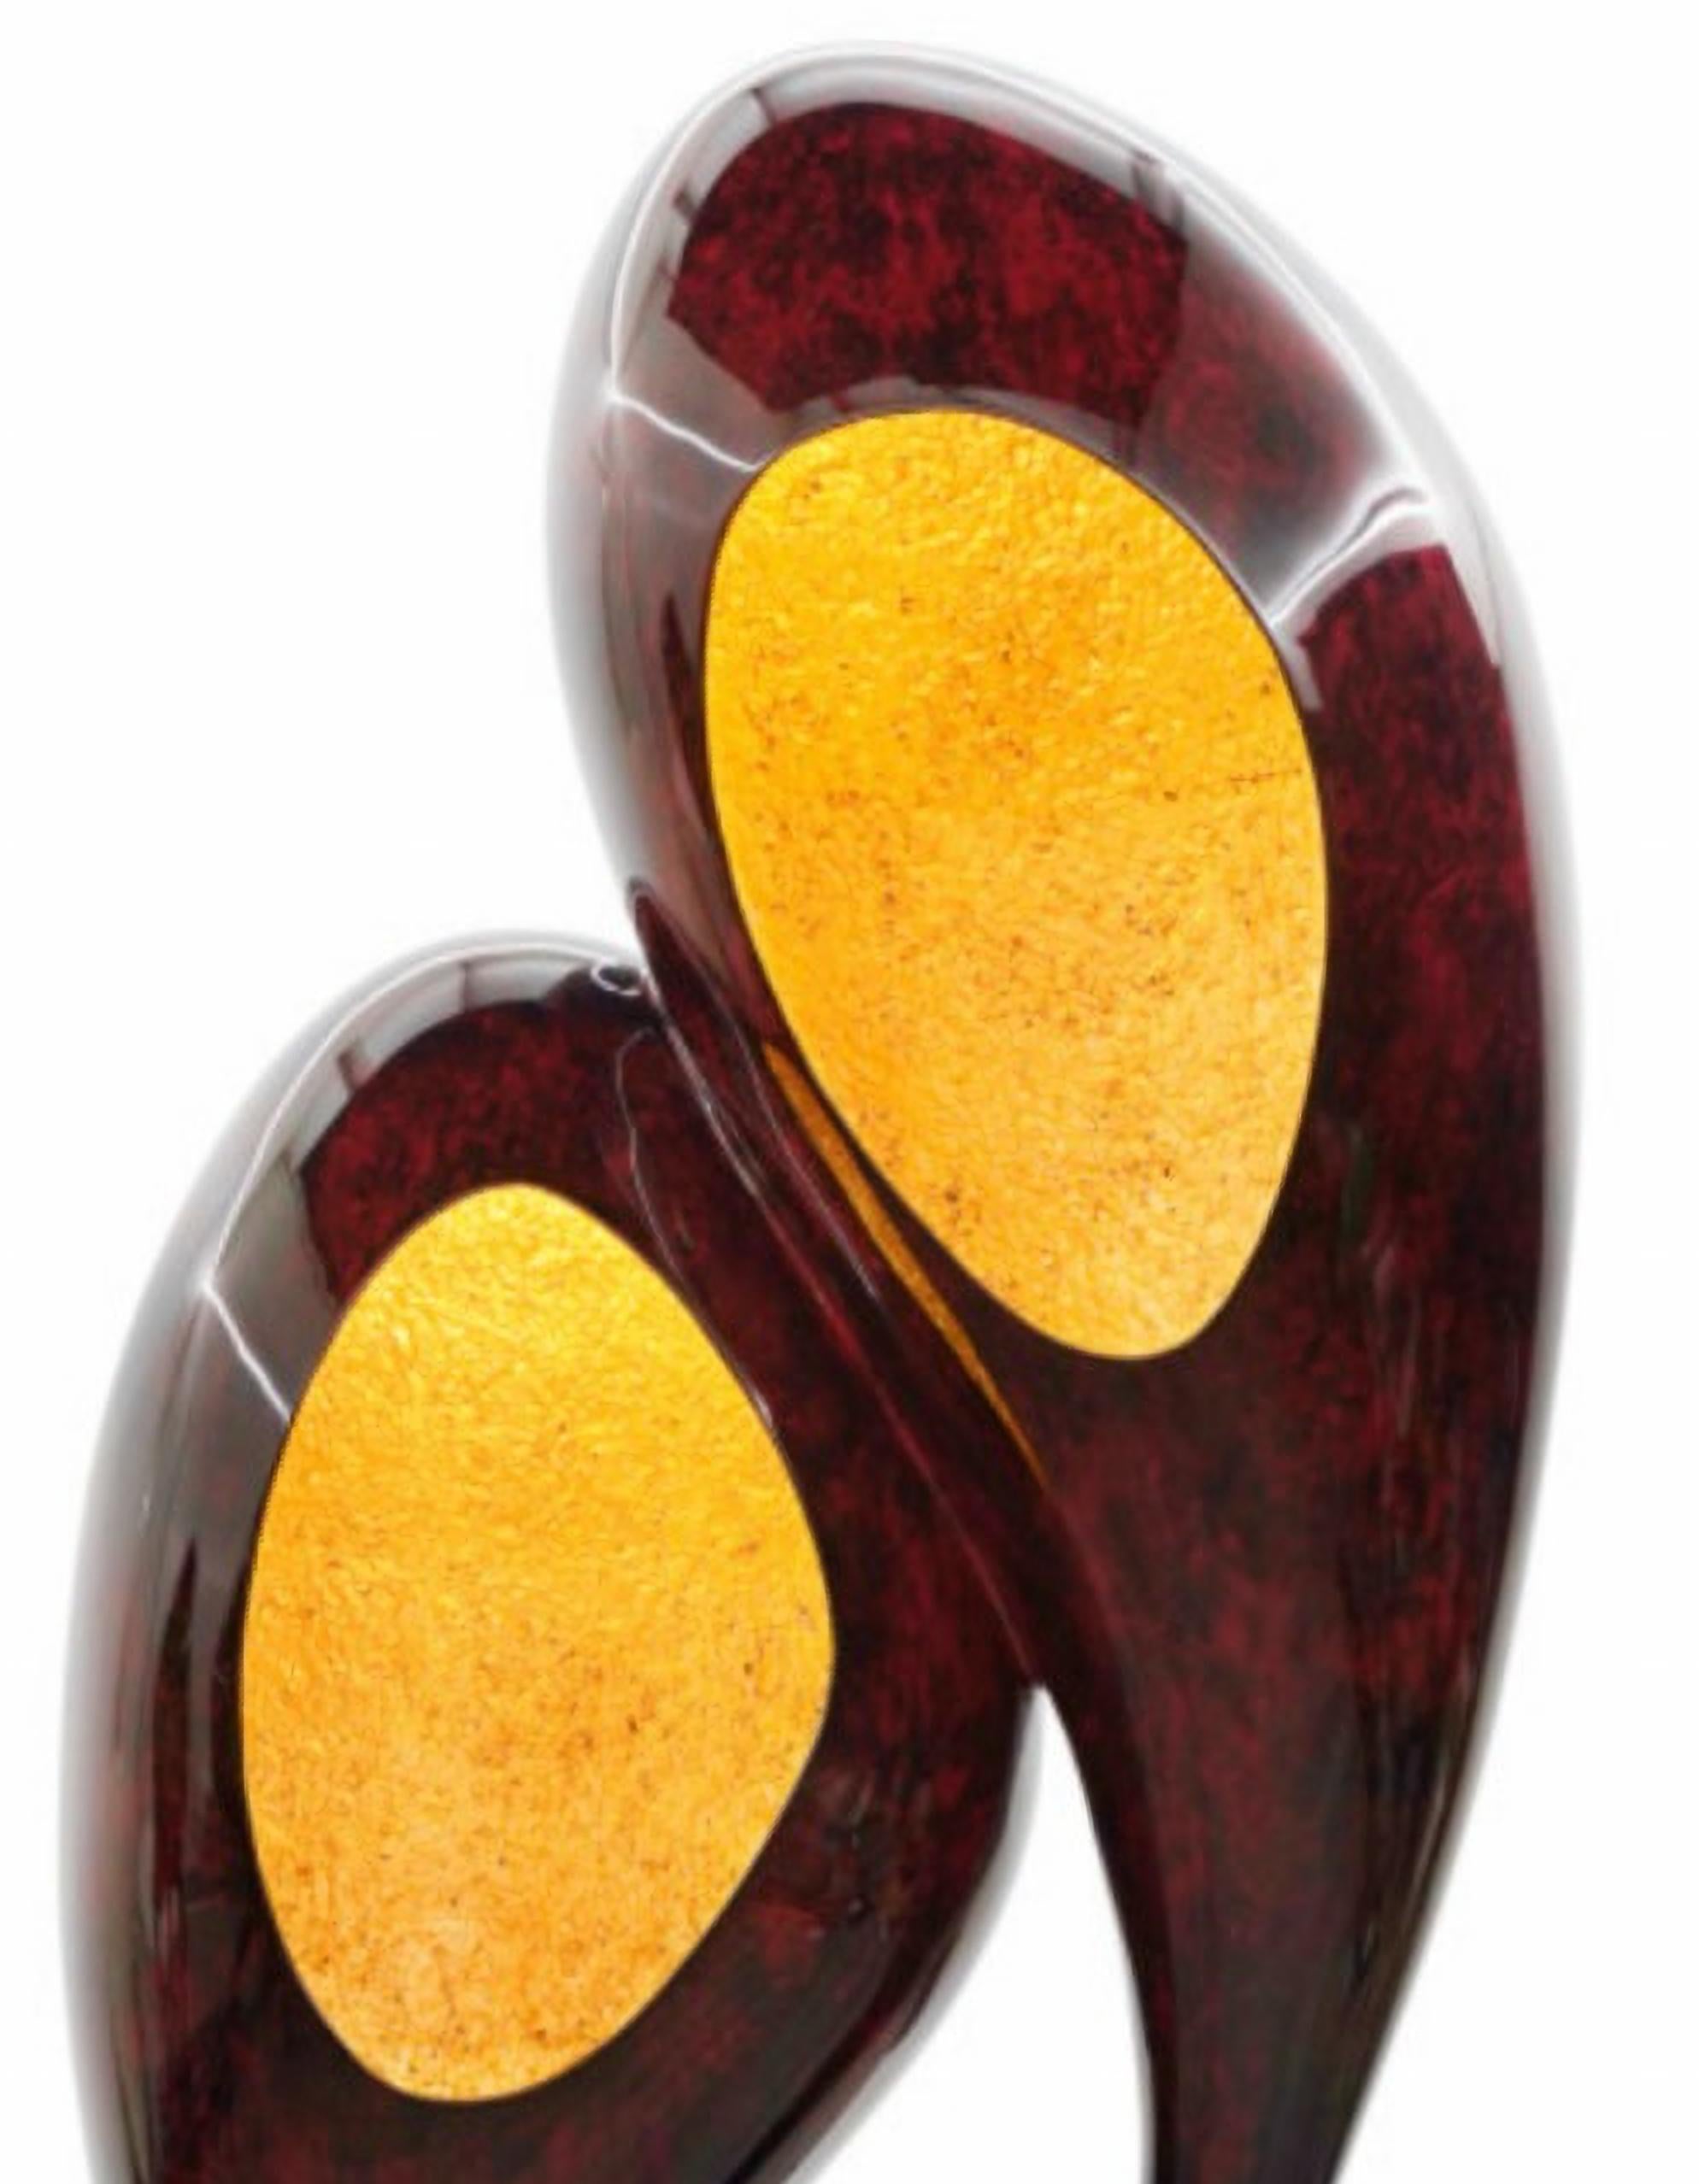 New unique display case.

Textured gold leaf interior, high gloss red Opal structure.
Dimensions:
73 x 63 x 198 cm
28.7 x 24.8 x 78 in.

External structure: resin reinforced with fiberglass with high gloss red Opal finish;
Internal structure: resin